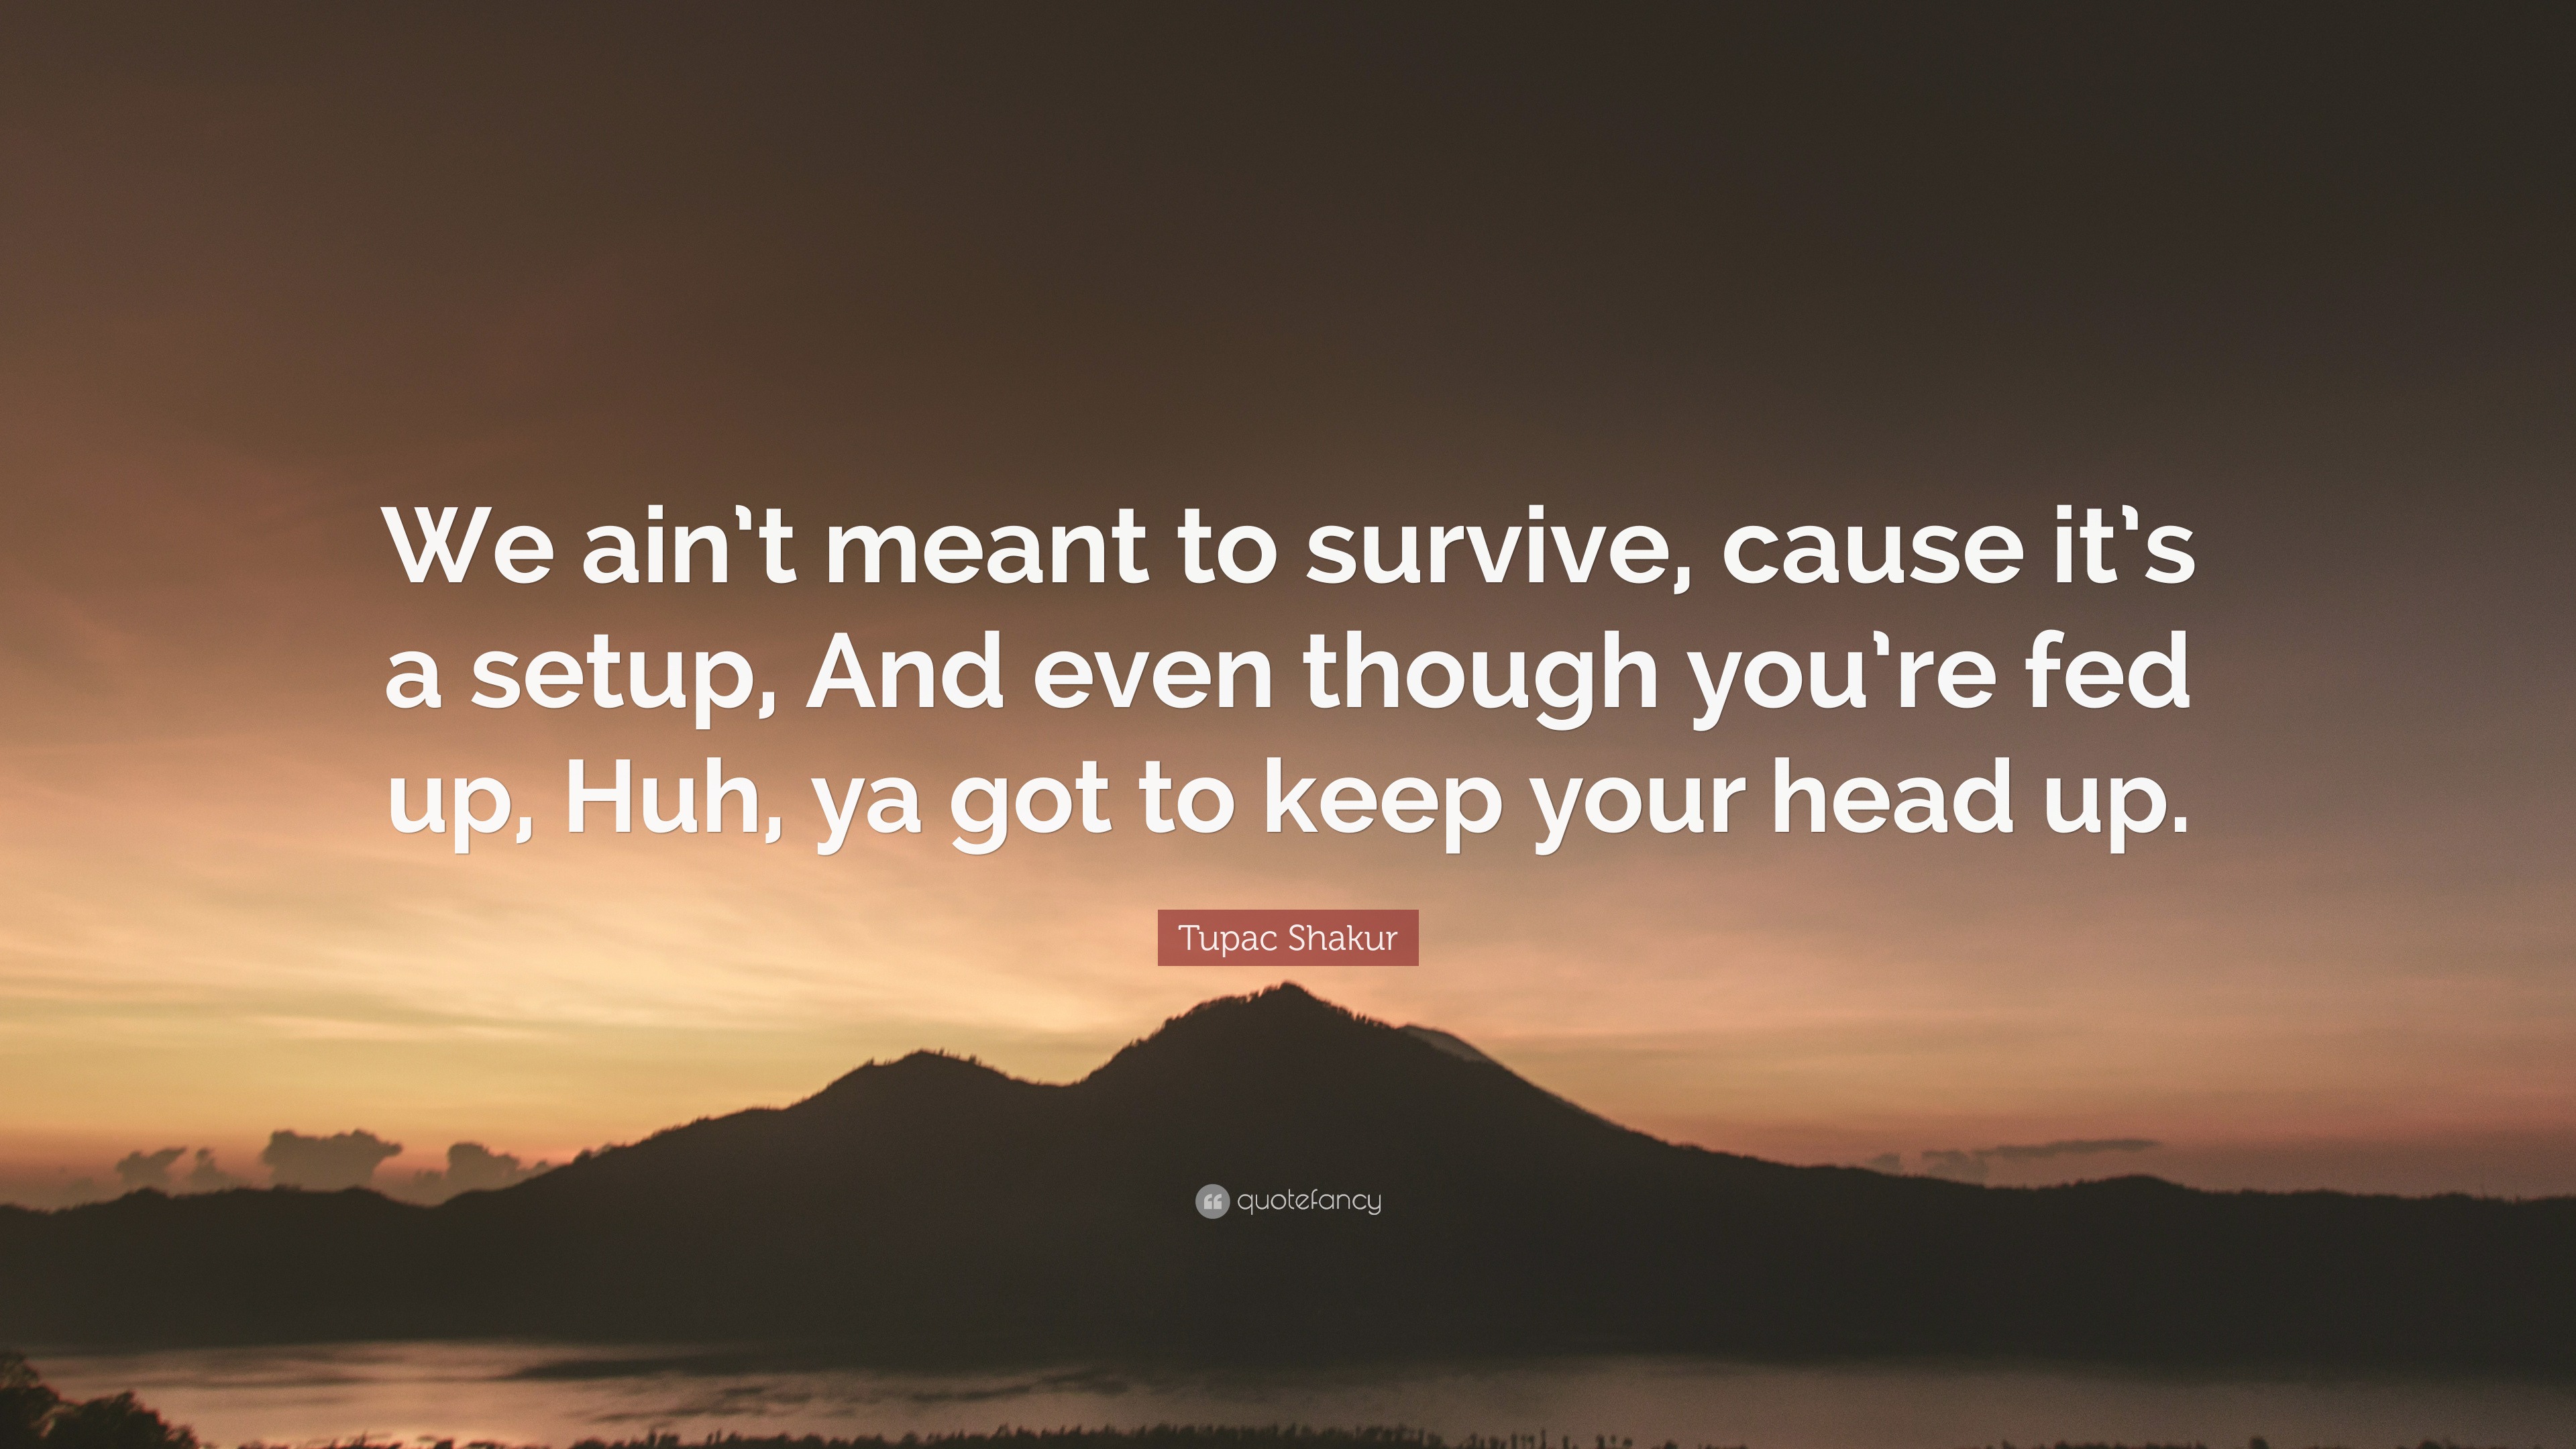 Tupac Shakur Quote: "We ain't meant to survive, cause it's ...